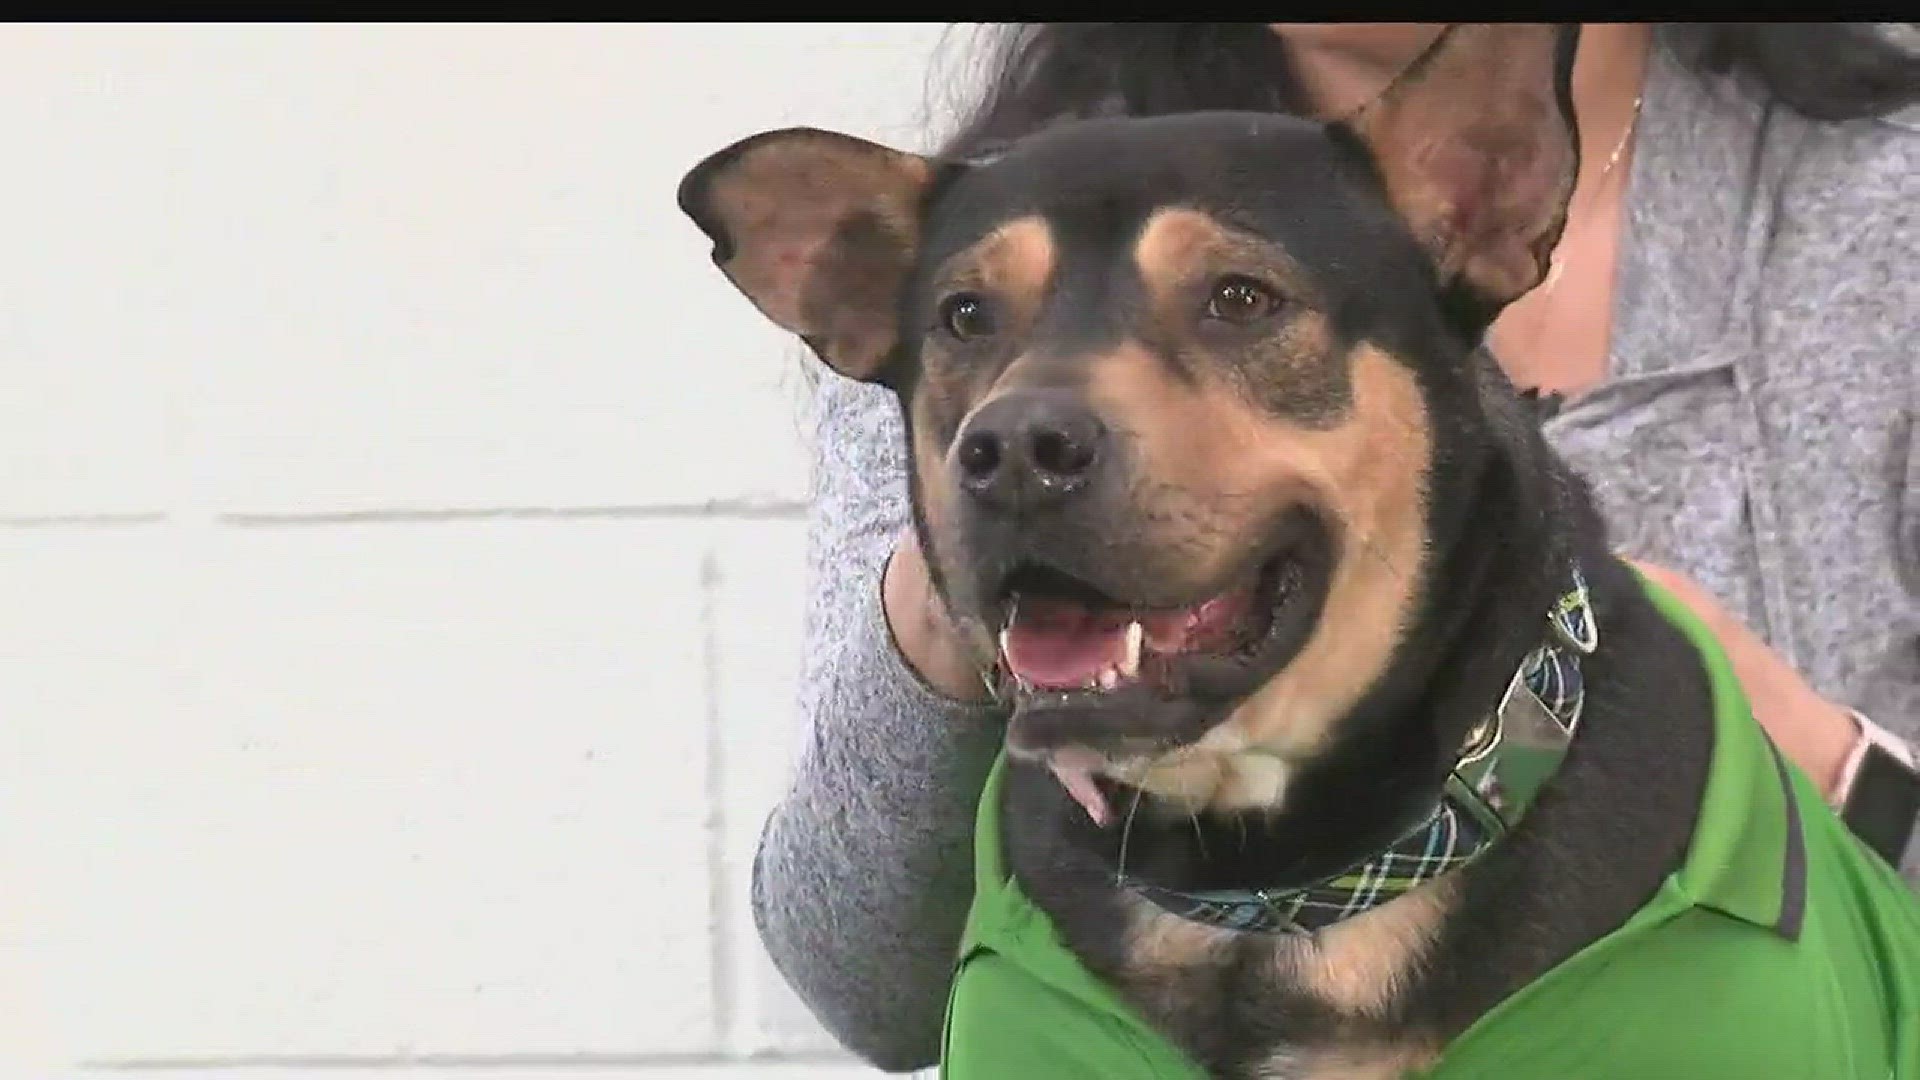 Adopt from the Gulf Coast Humane Society today.